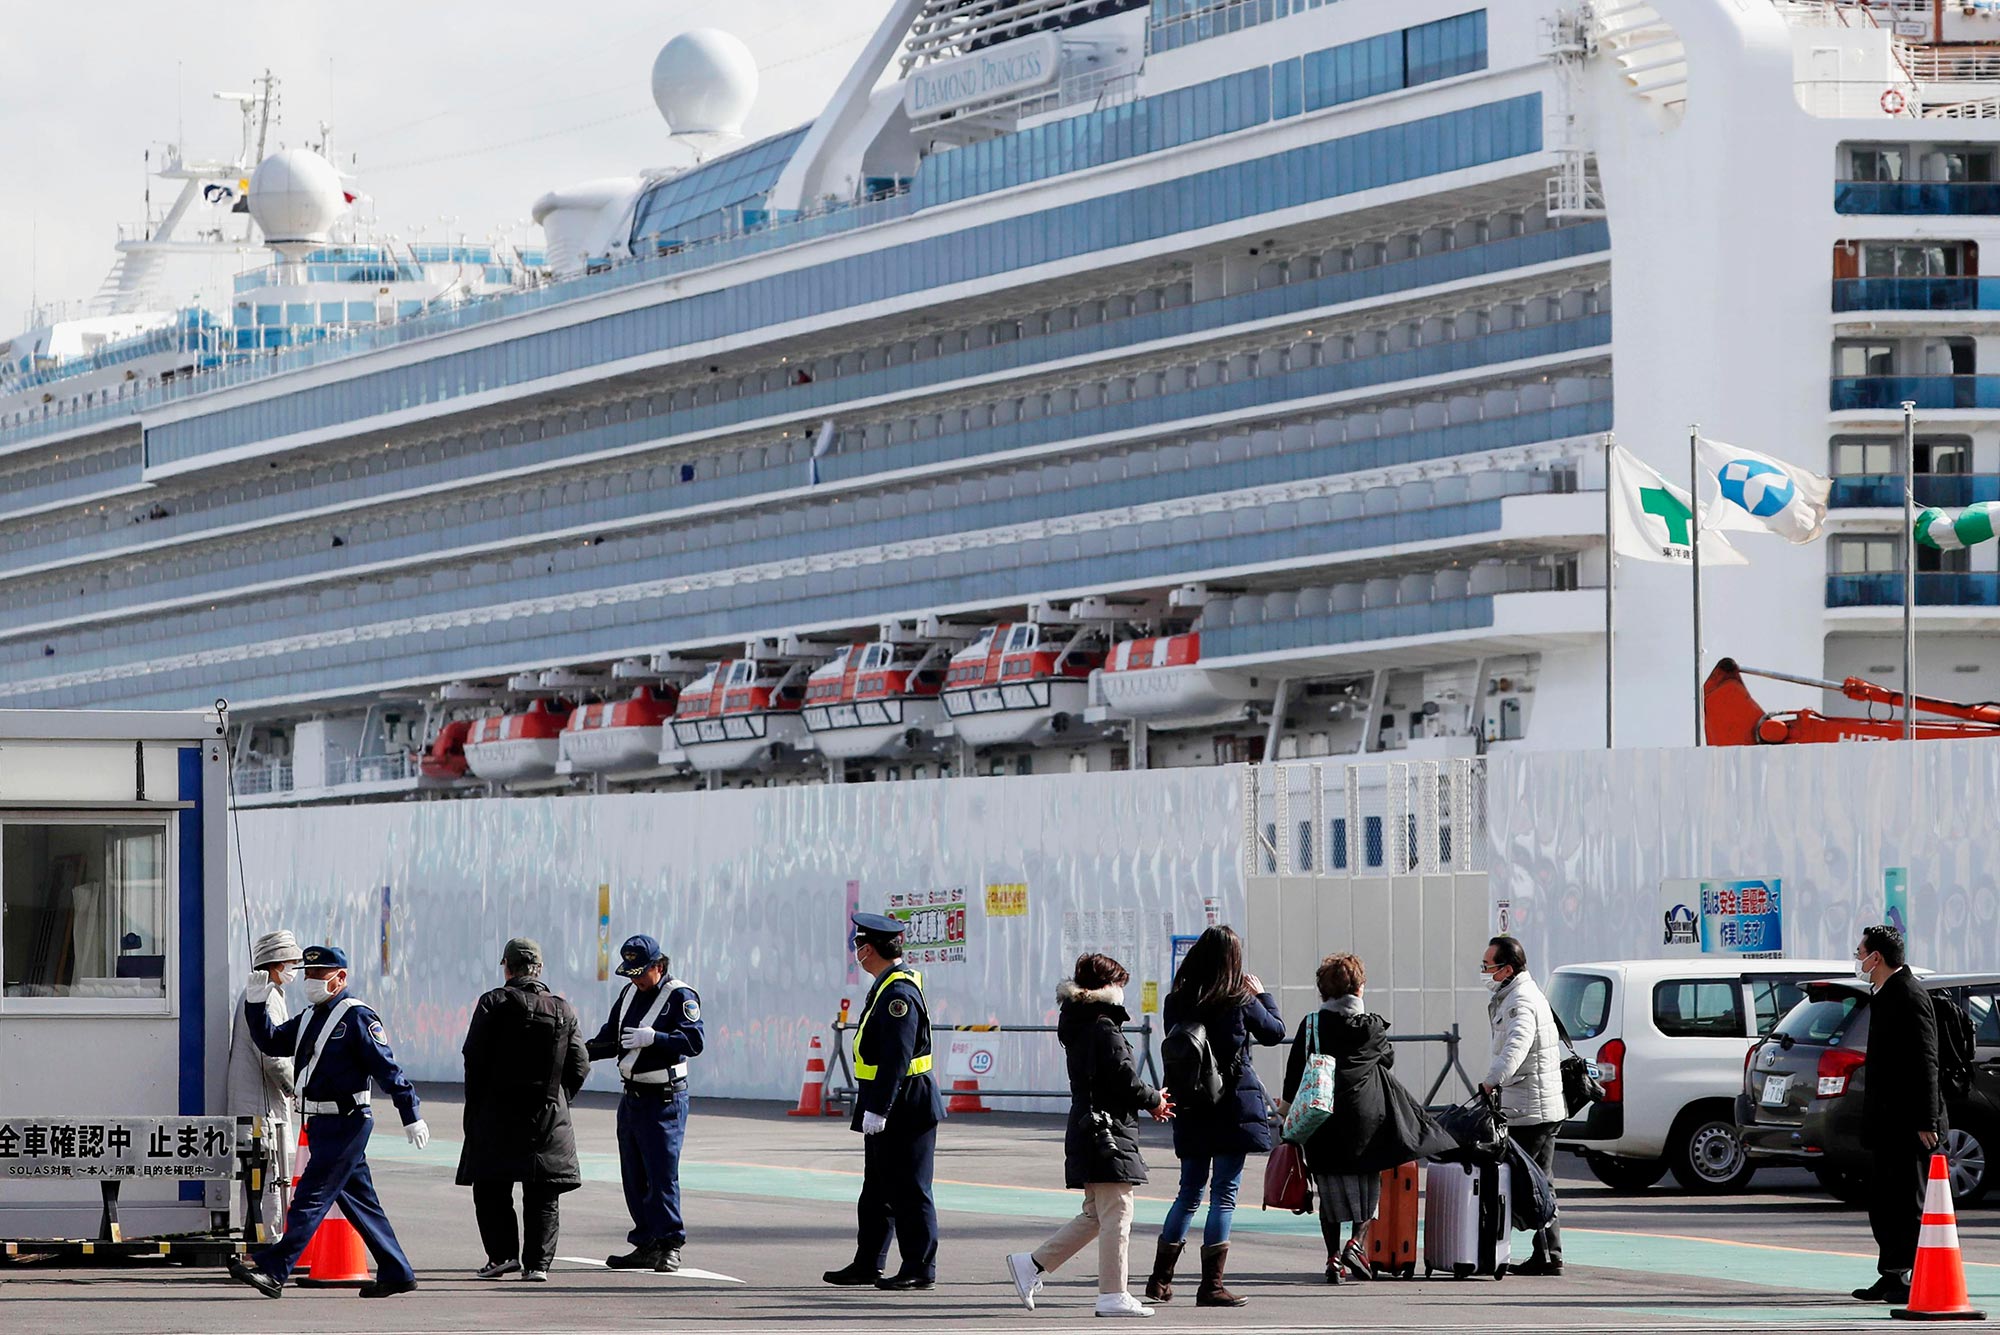 Cruise Lines Affected By The Coronavirus